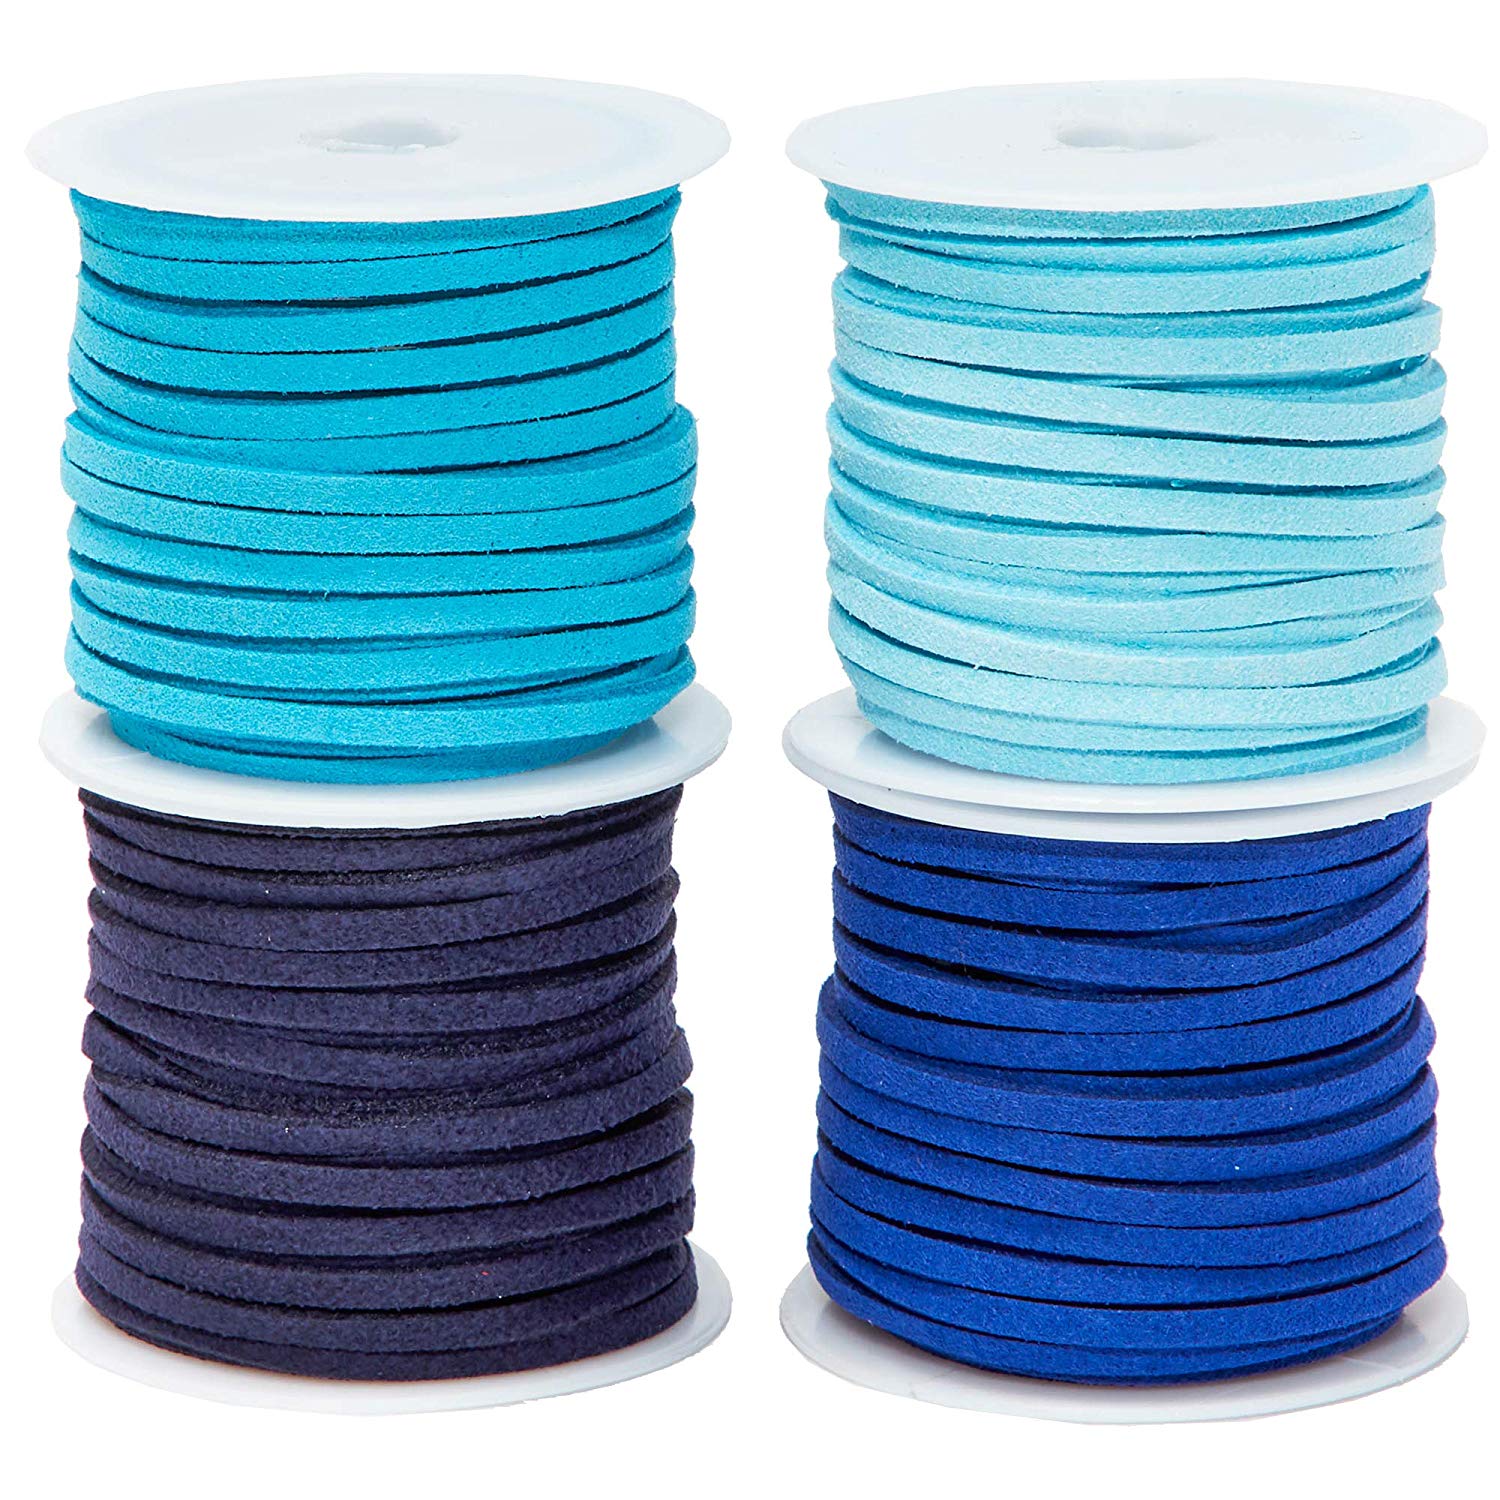 30 Pack Leather Cord Lacing for Jewelry Making DIY Crafts (5.5 Yards/Spool 30 Colors)